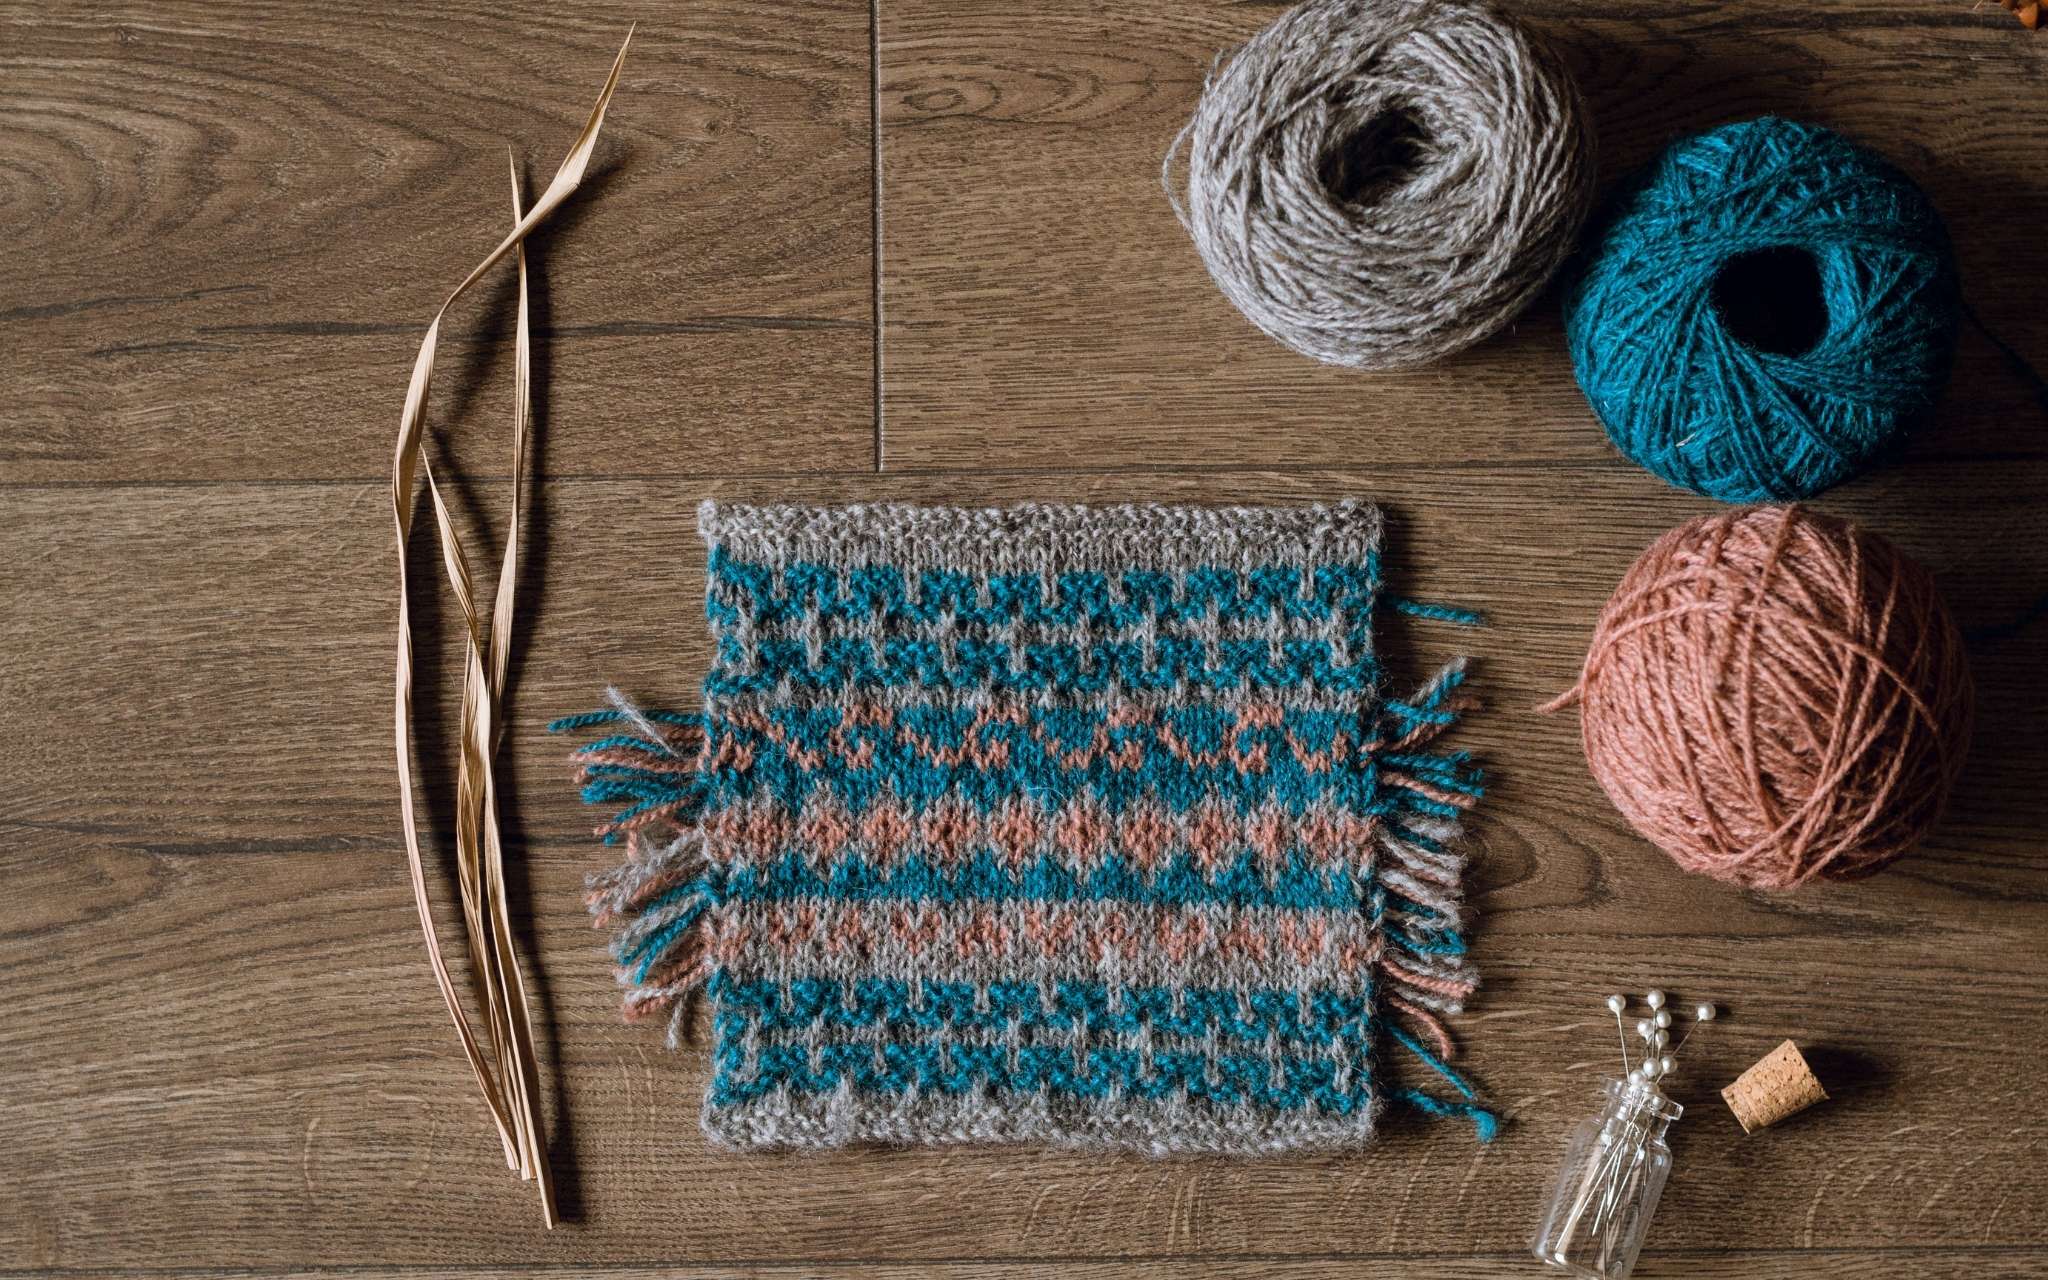 A swatch of colourwork knitting in dark blue, coral and grey laid flat on a wooden surface. There are some dried stems, scissors and a bottle of pints to the side.